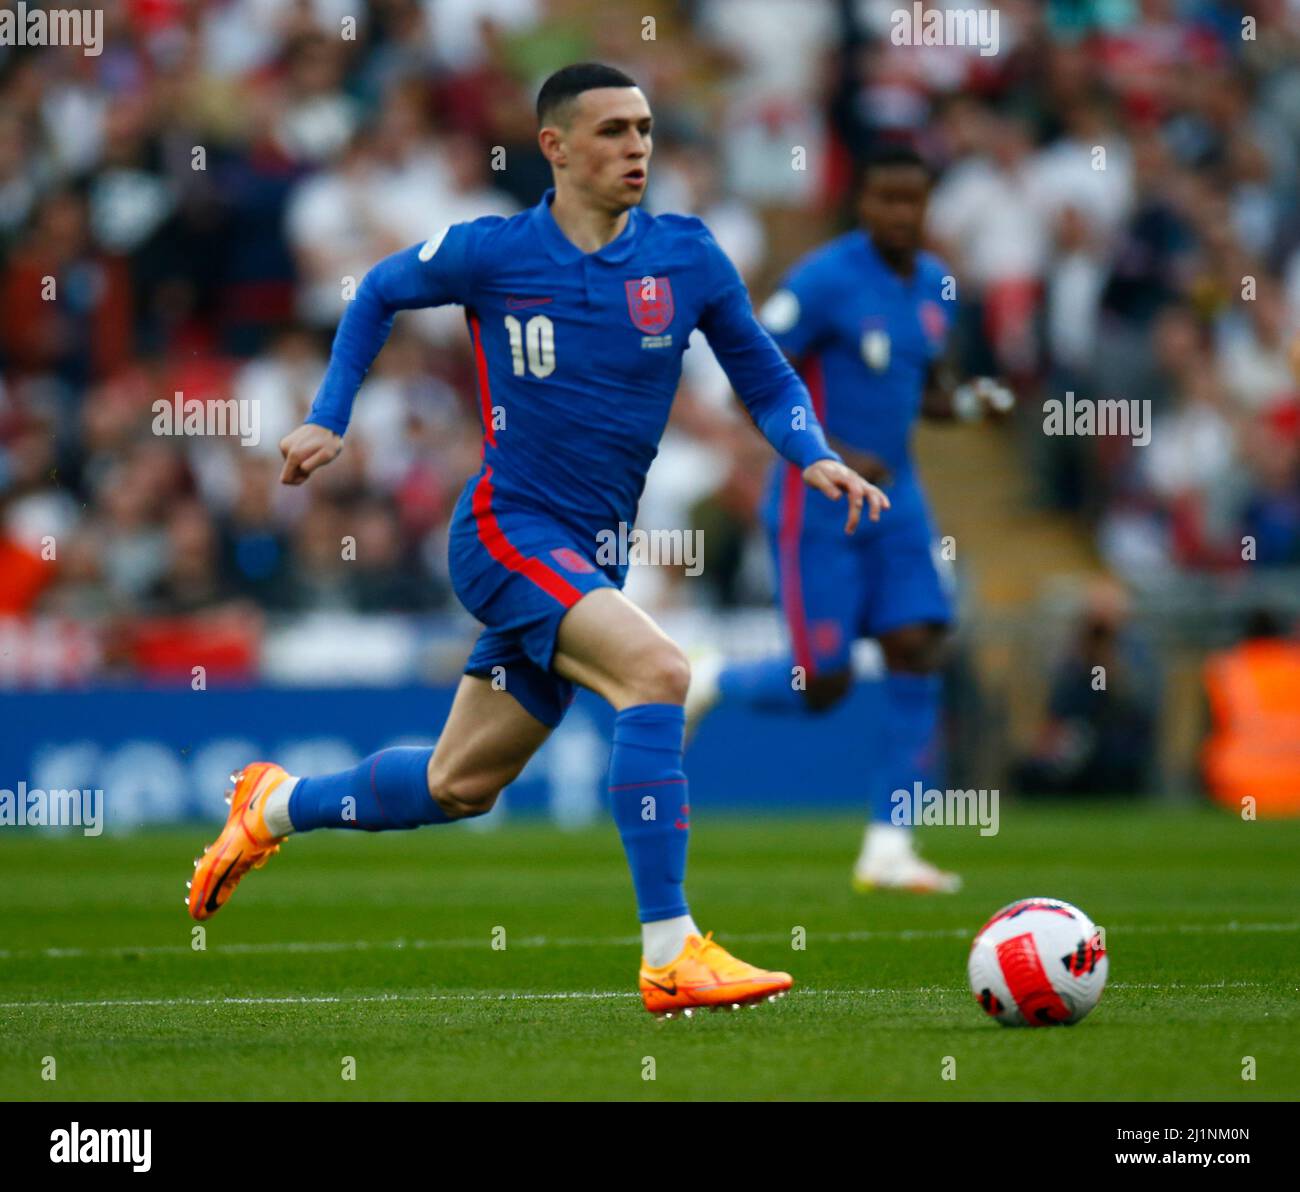 LONDON, ENGLAND - MARCH 26: Phil Foden (Man City) of England in action during An Alzheimer's Society International between England and Switzerland at Stock Photo